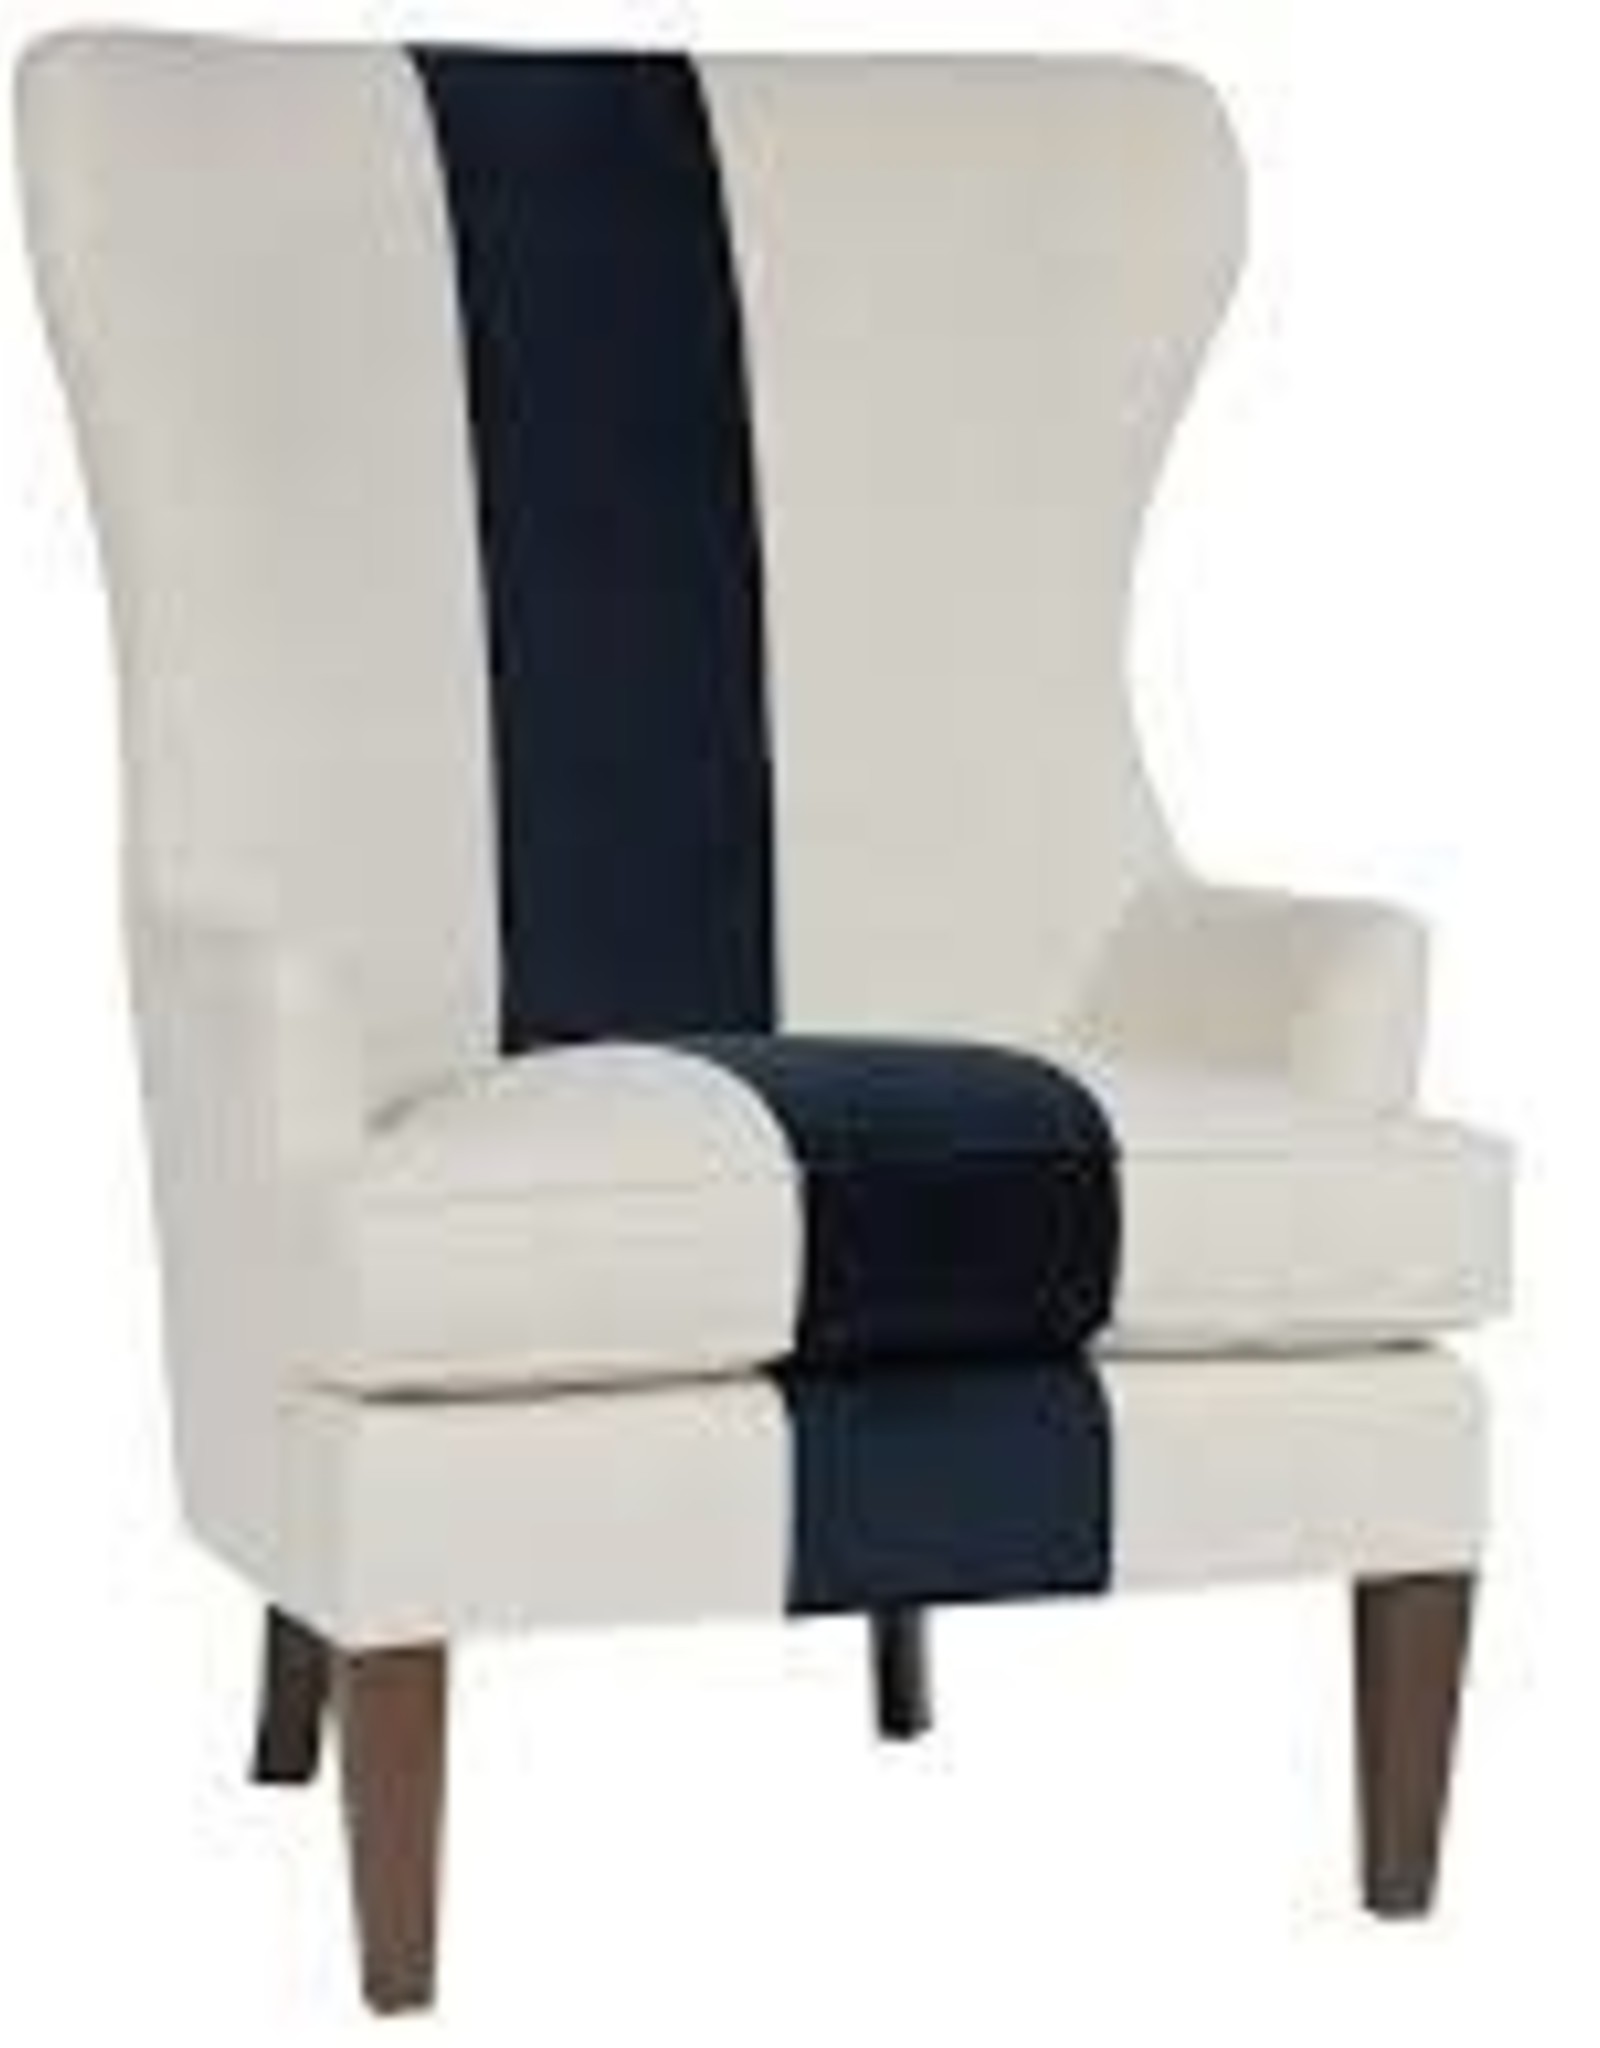 Surfside Wing Chair